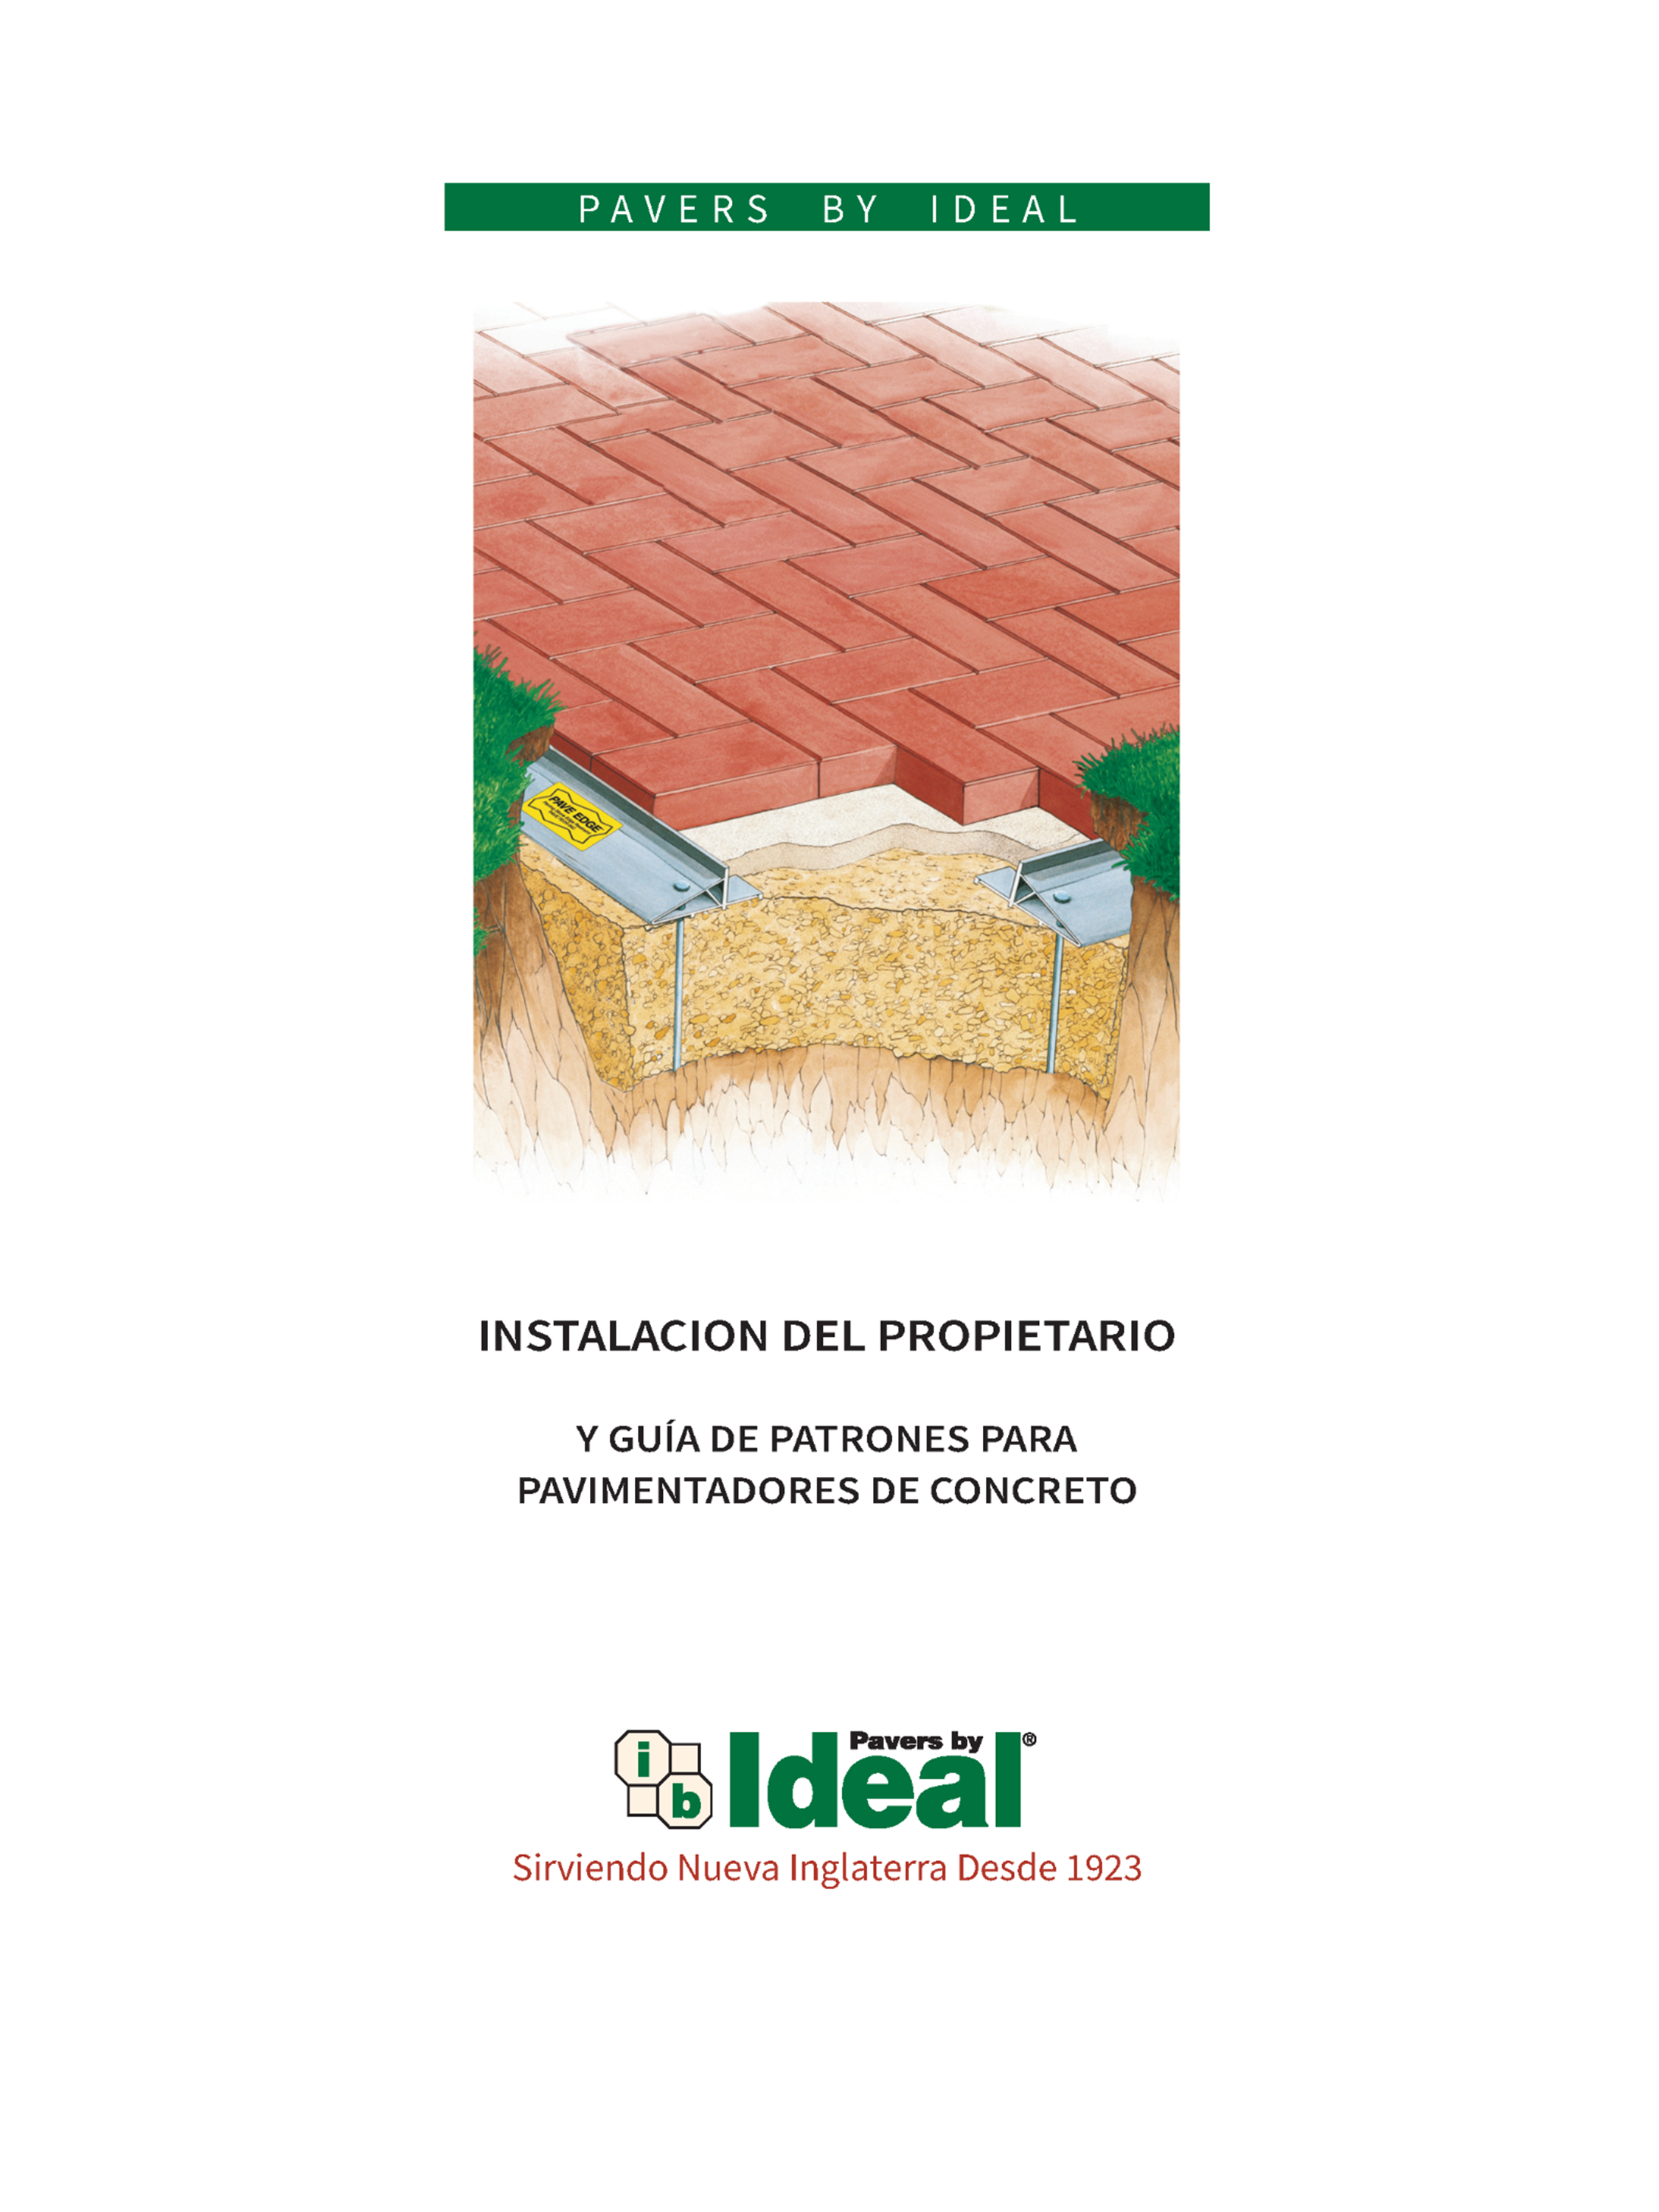 Homeowner Installation And Pattern Guide For Concrete Pavers Spanish Pavers By Ideal